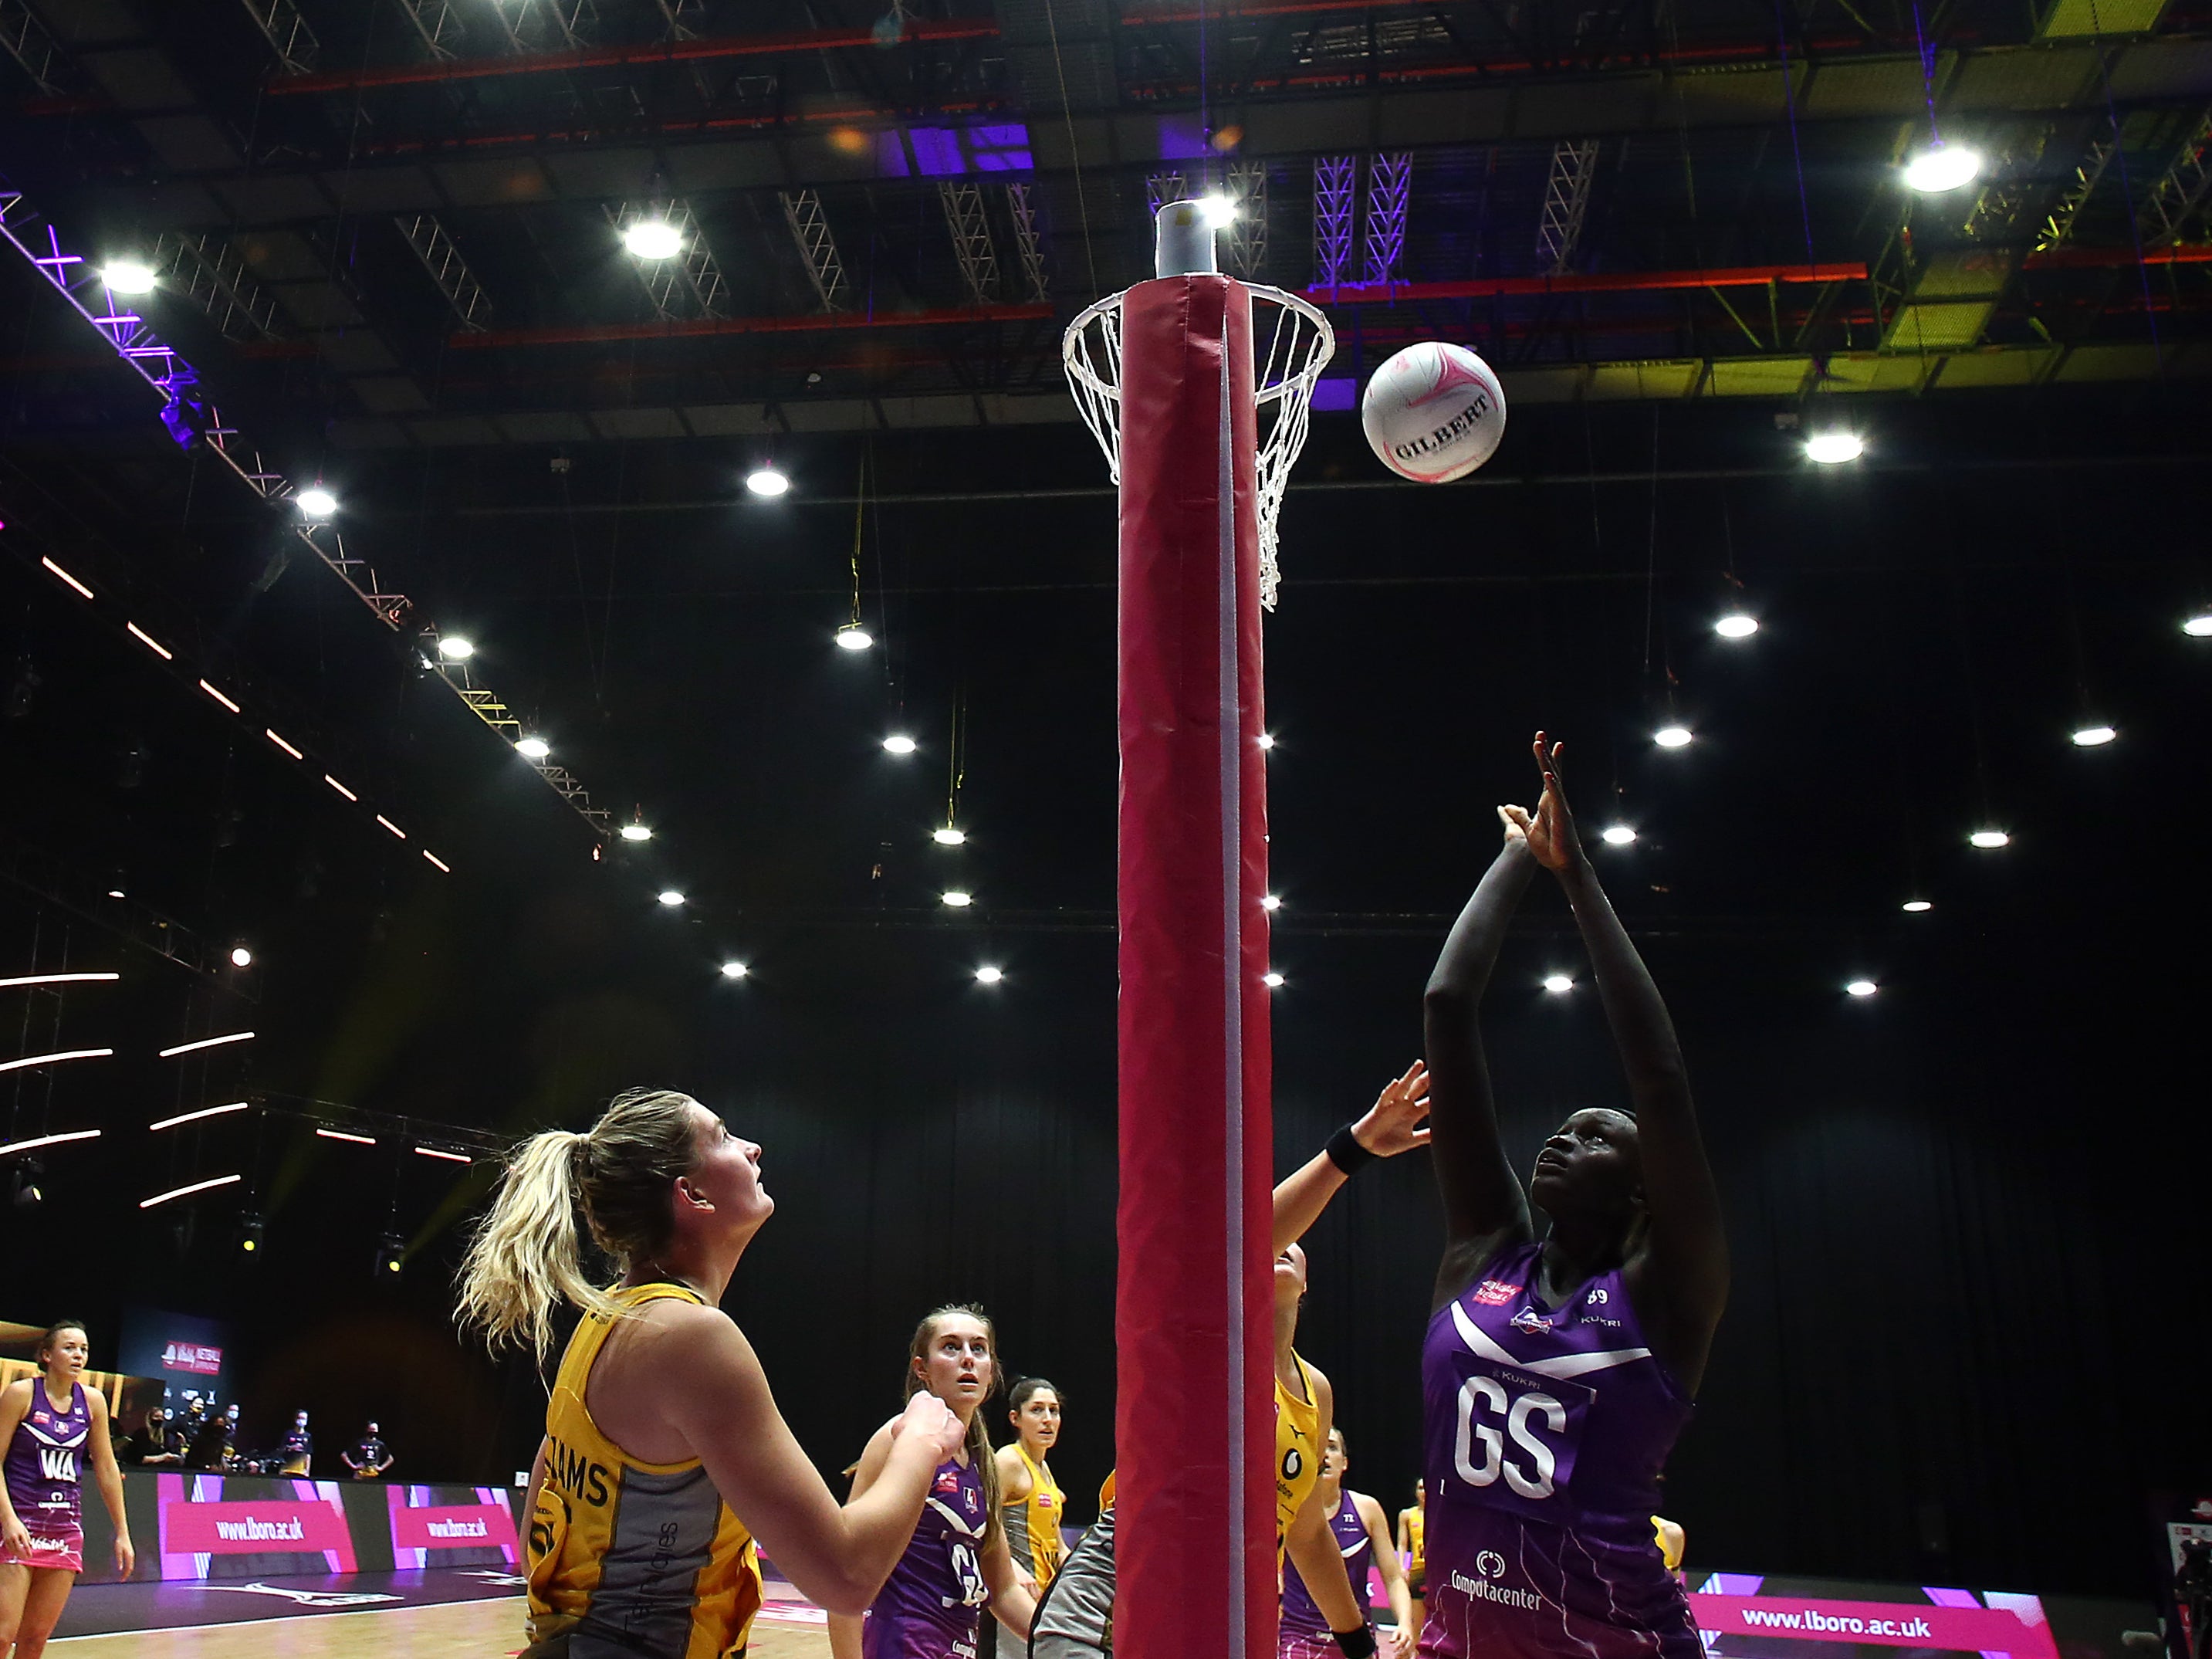 It was another thrilling round in the Vitality Superleague